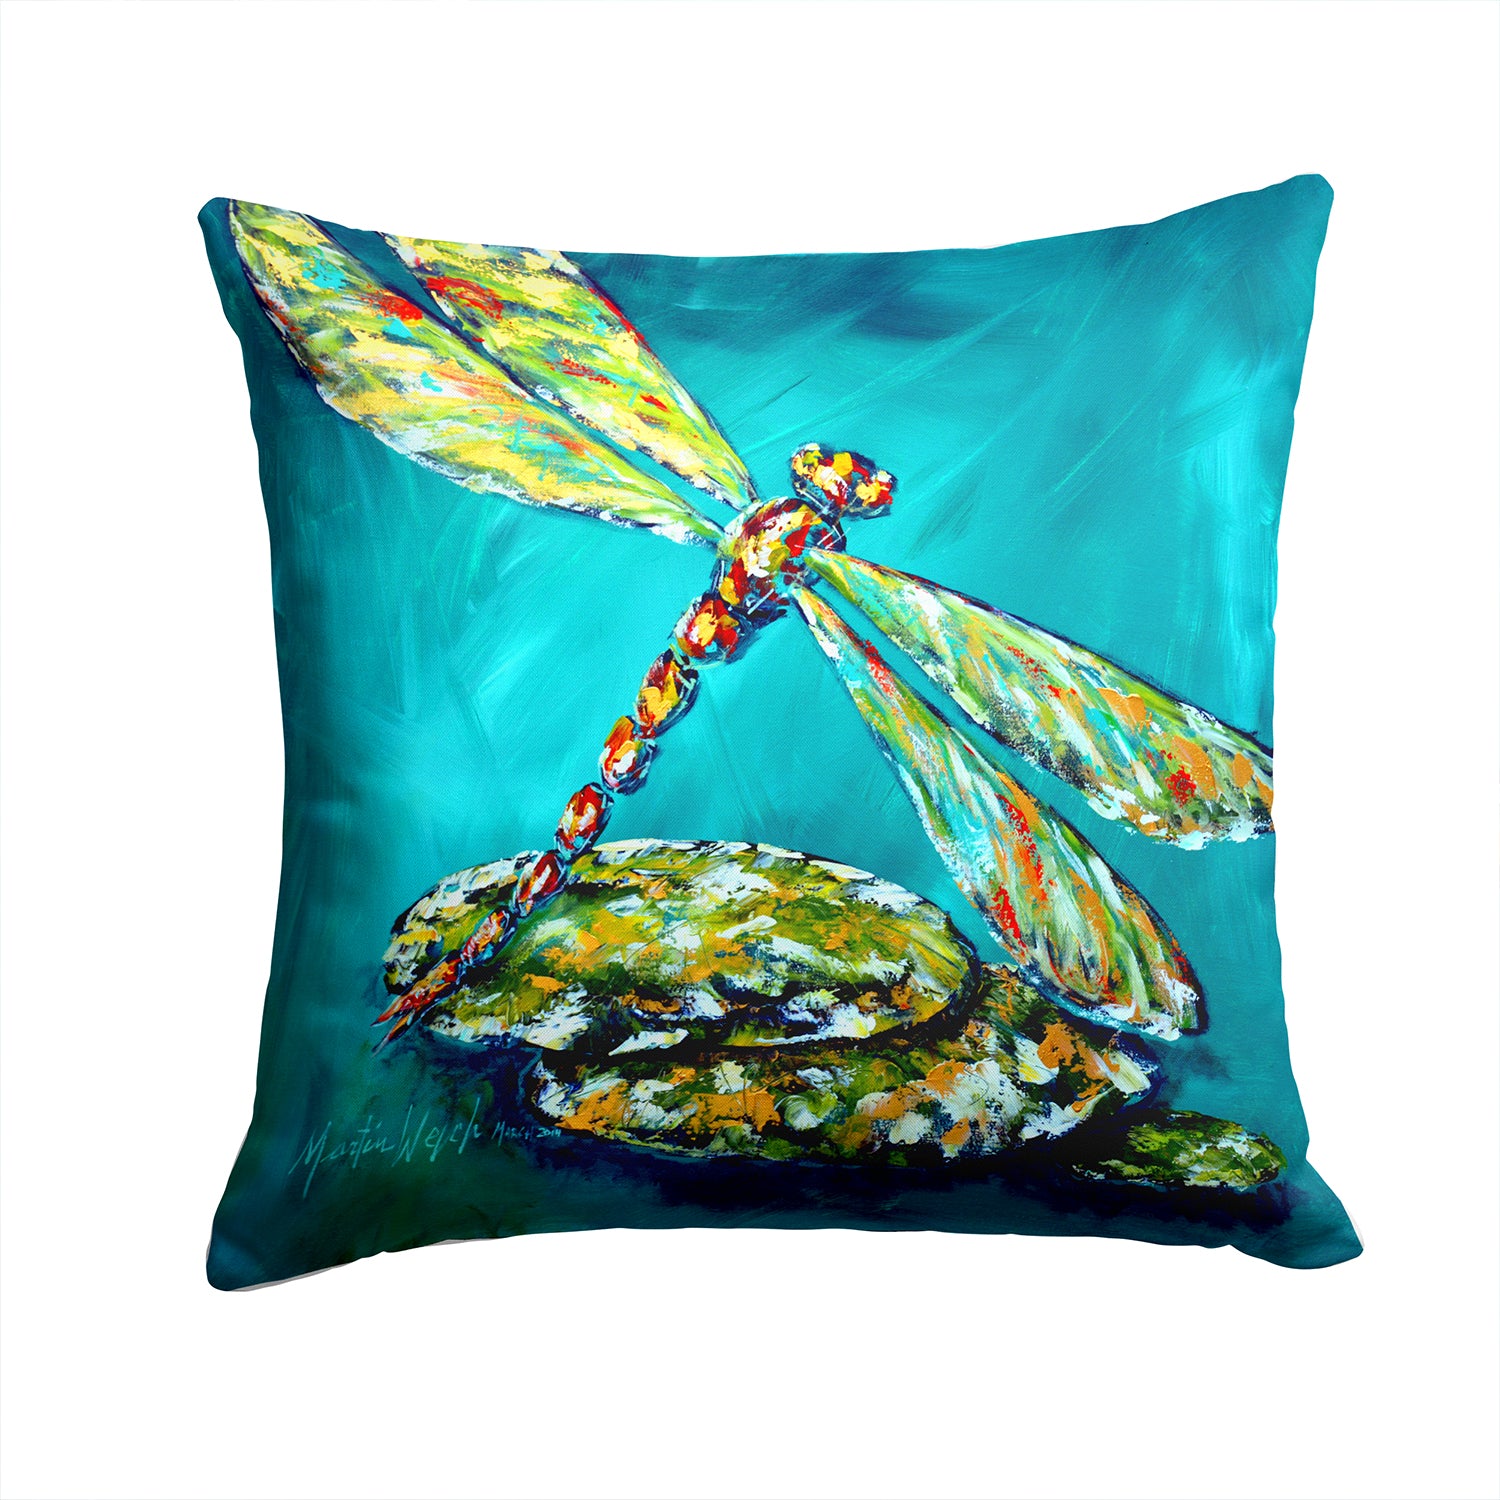 Buy this Dragonfly Matin Fabric Decorative Pillow